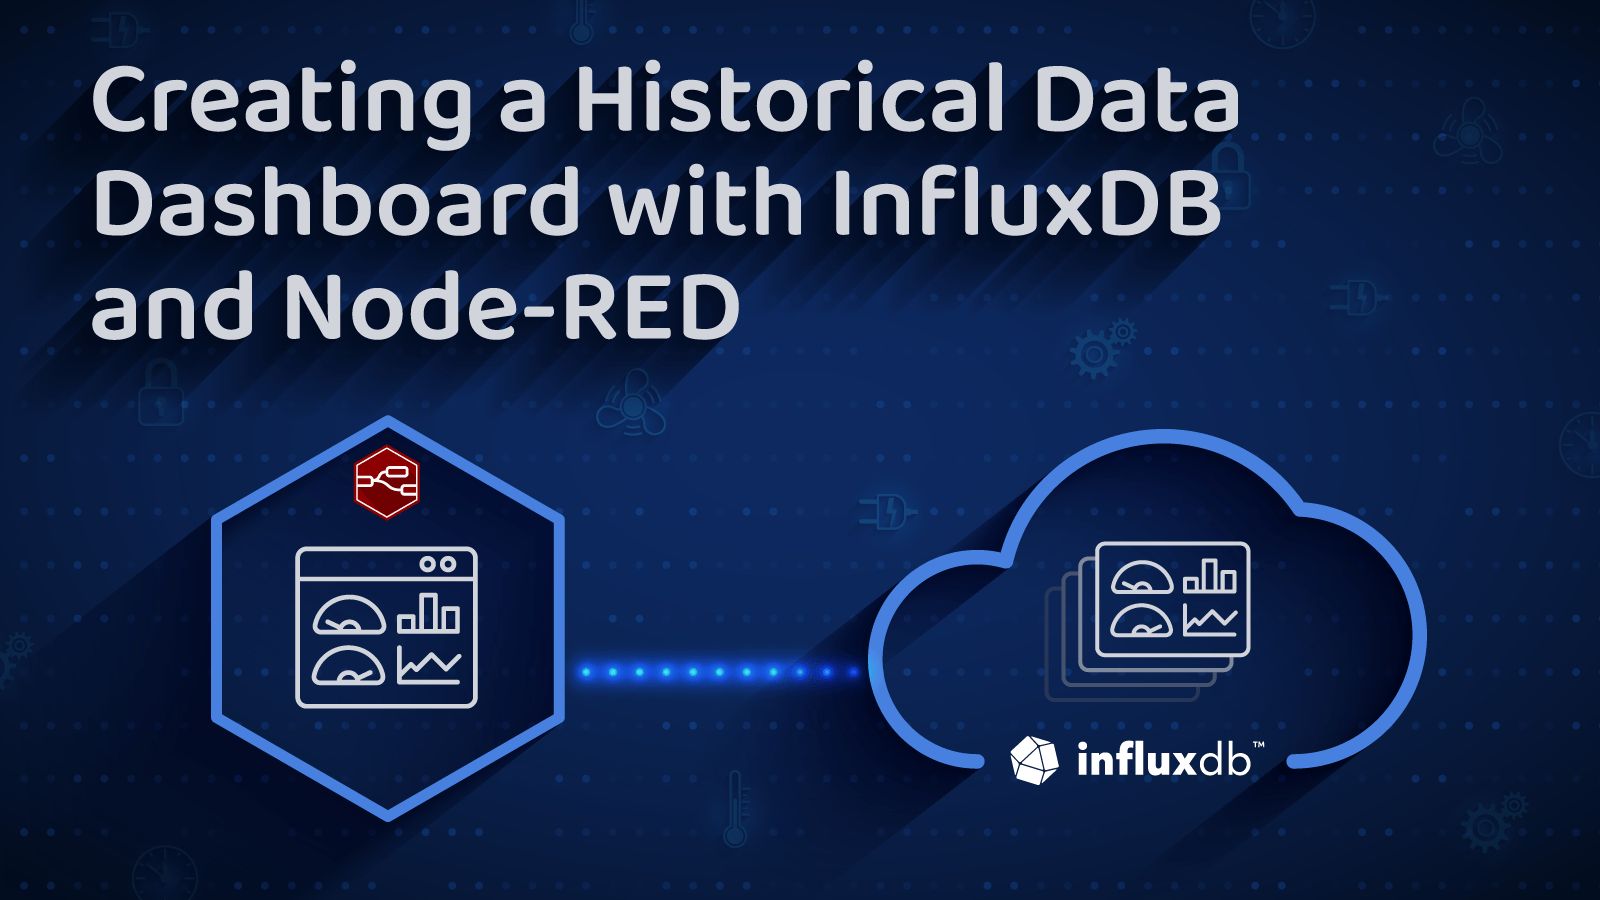 Image representing Creating a Historical Data Dashboard with InfluxDB and Node-RED